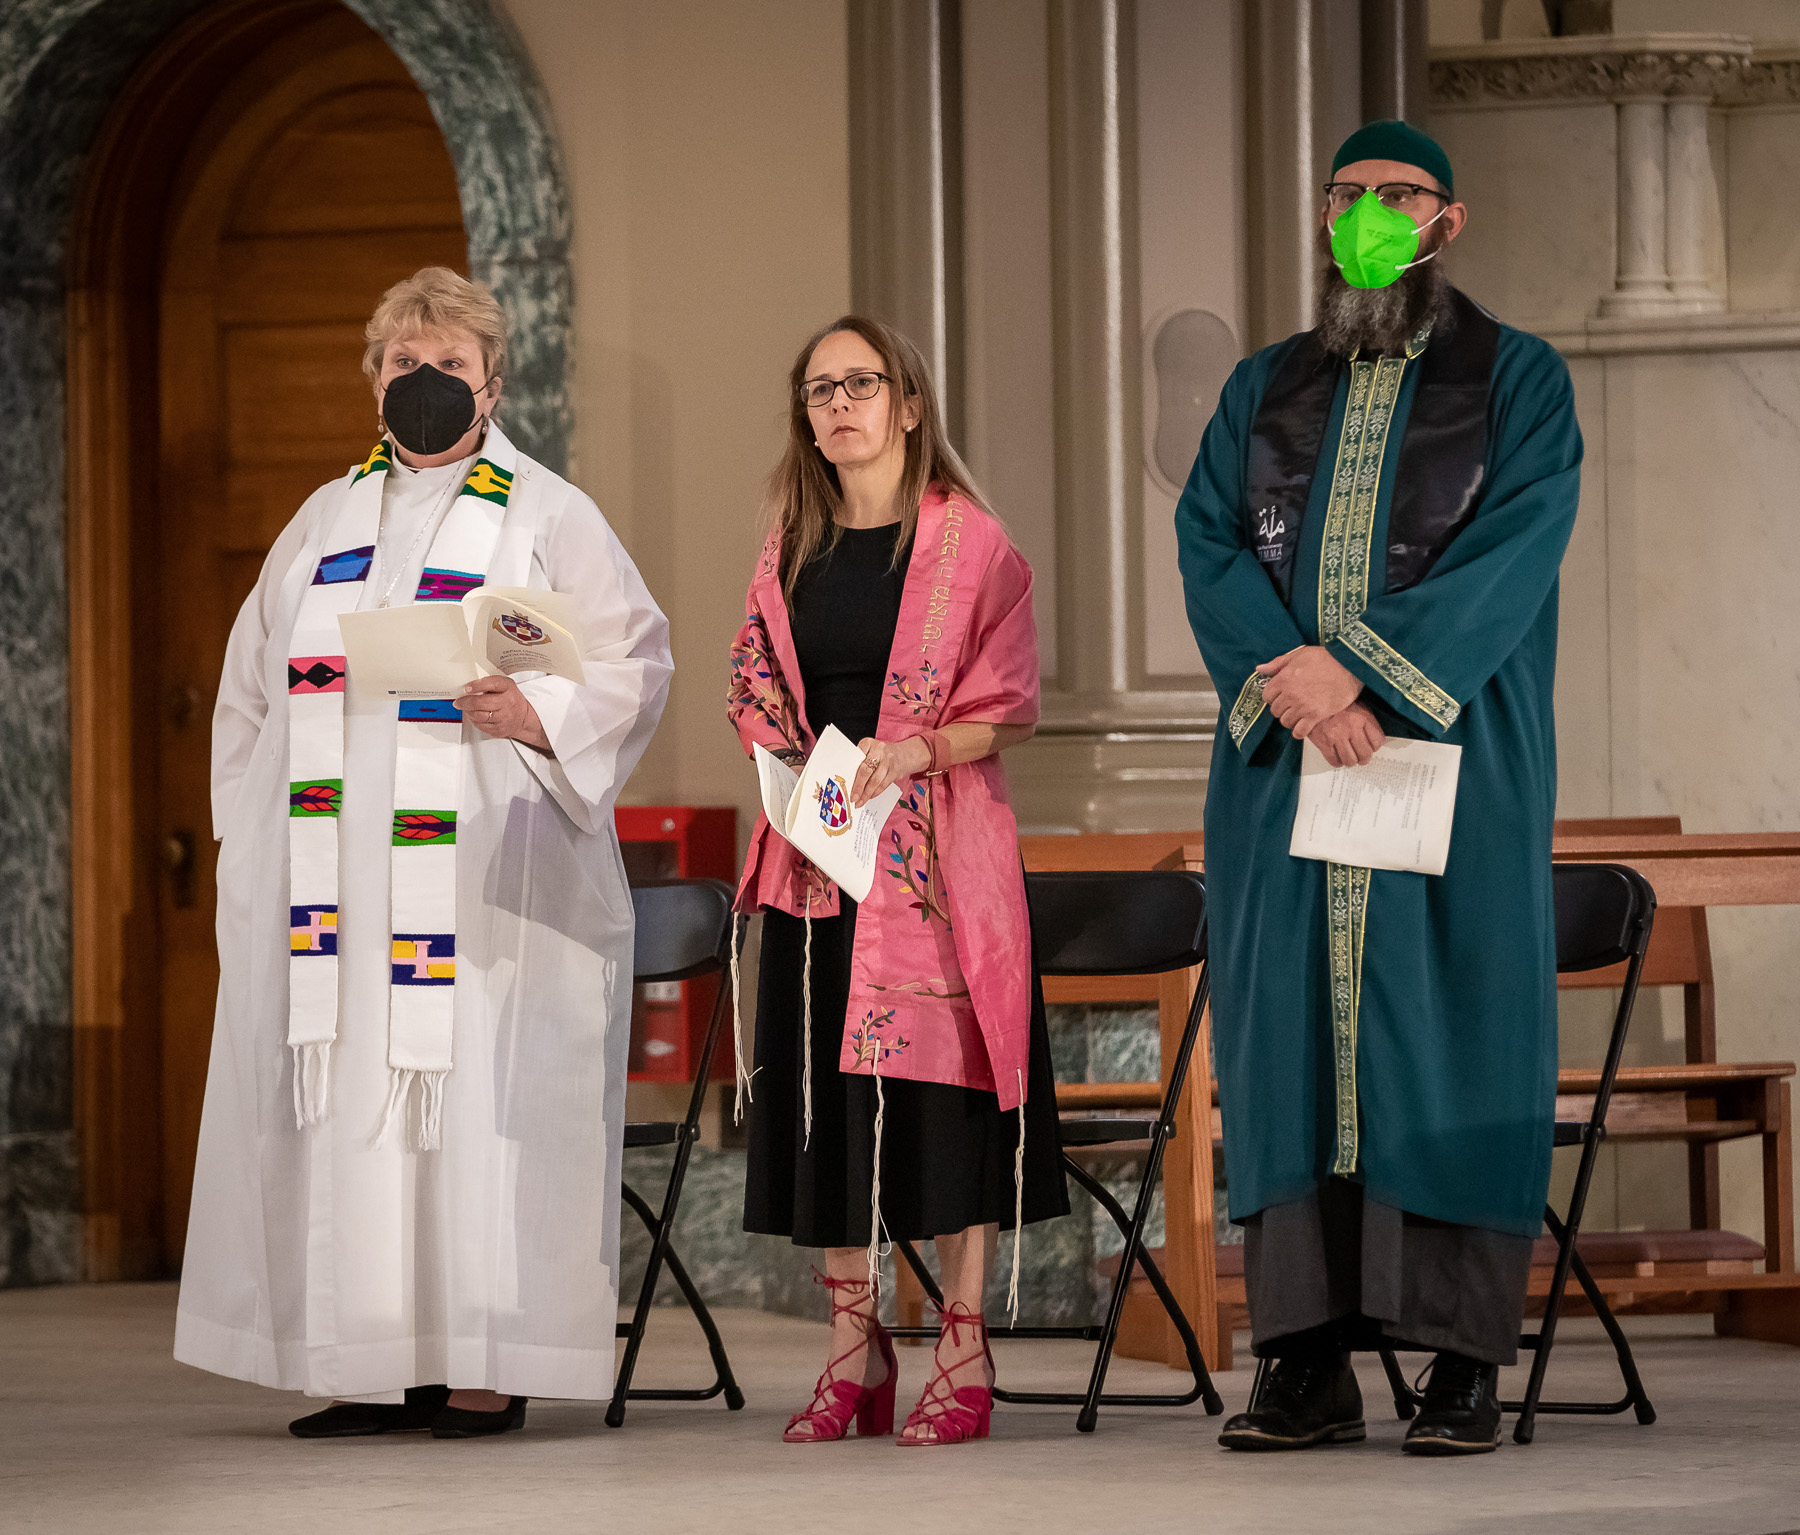 Interfaith leaders from the Division of Mission and Ministry, Diane Dardón, Emily Goldberg and Abdul-Malik Ryan, participated in the annual Baccalaureate Mass.